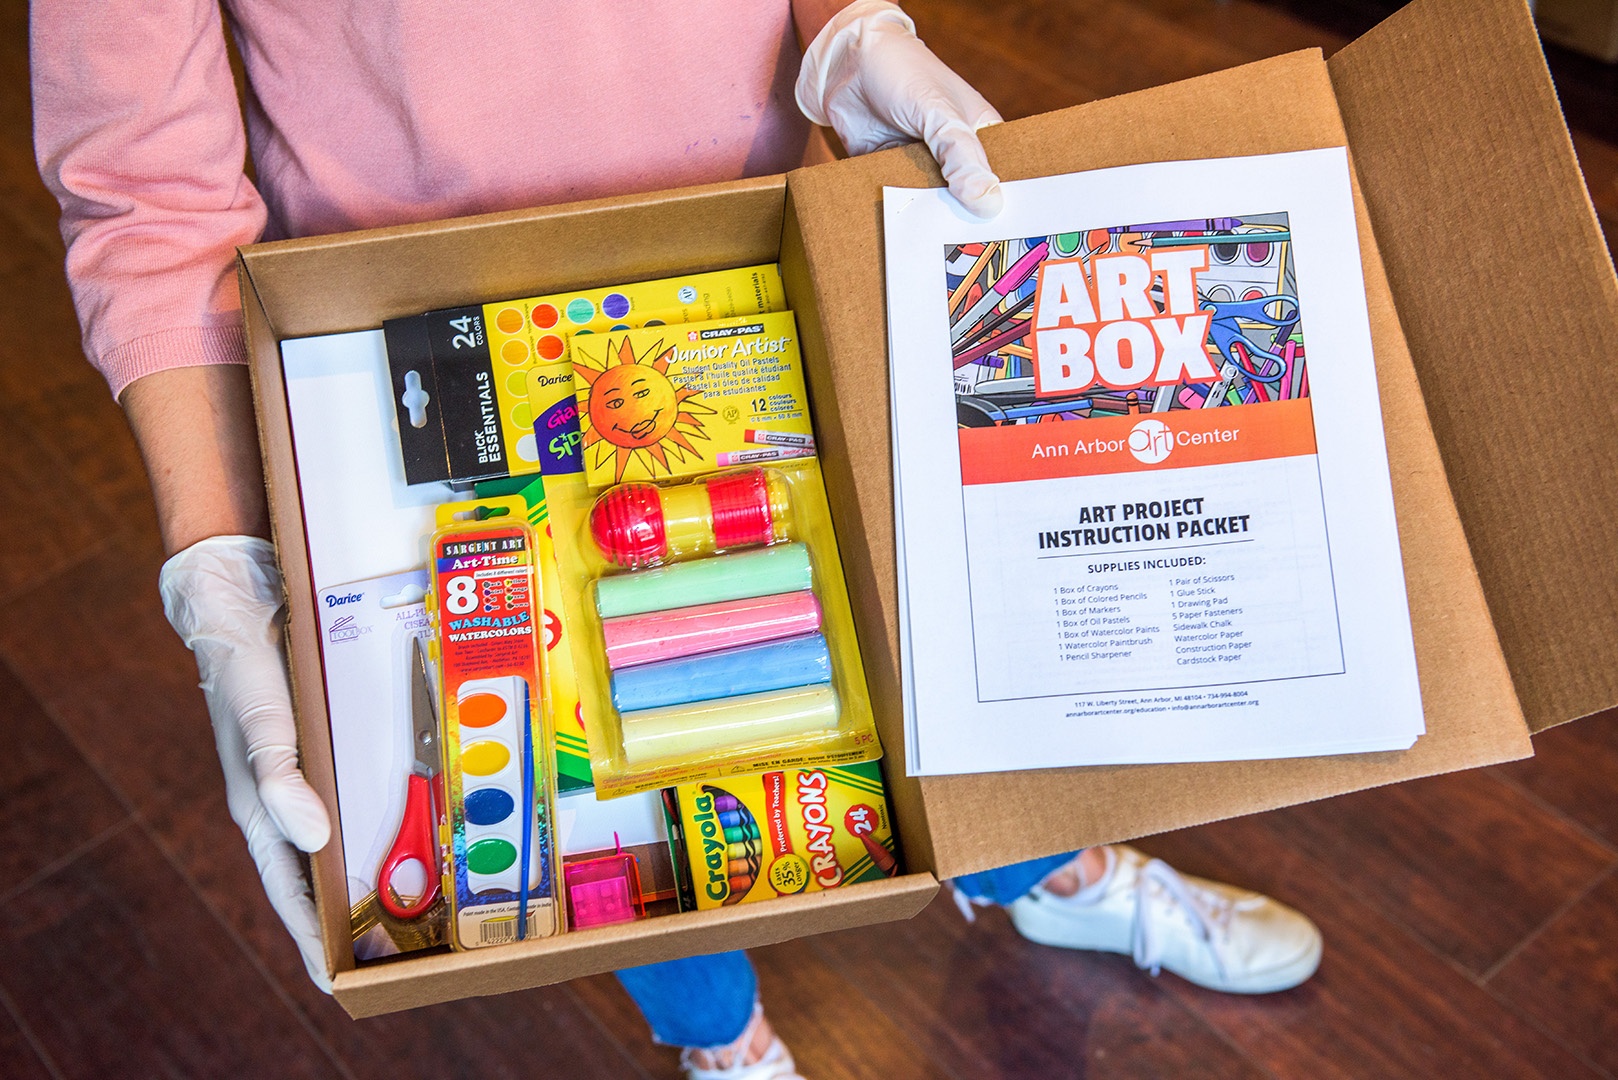 ‘Buy One Give Some’ art kits to support two Ann Arbor nonprofits in March